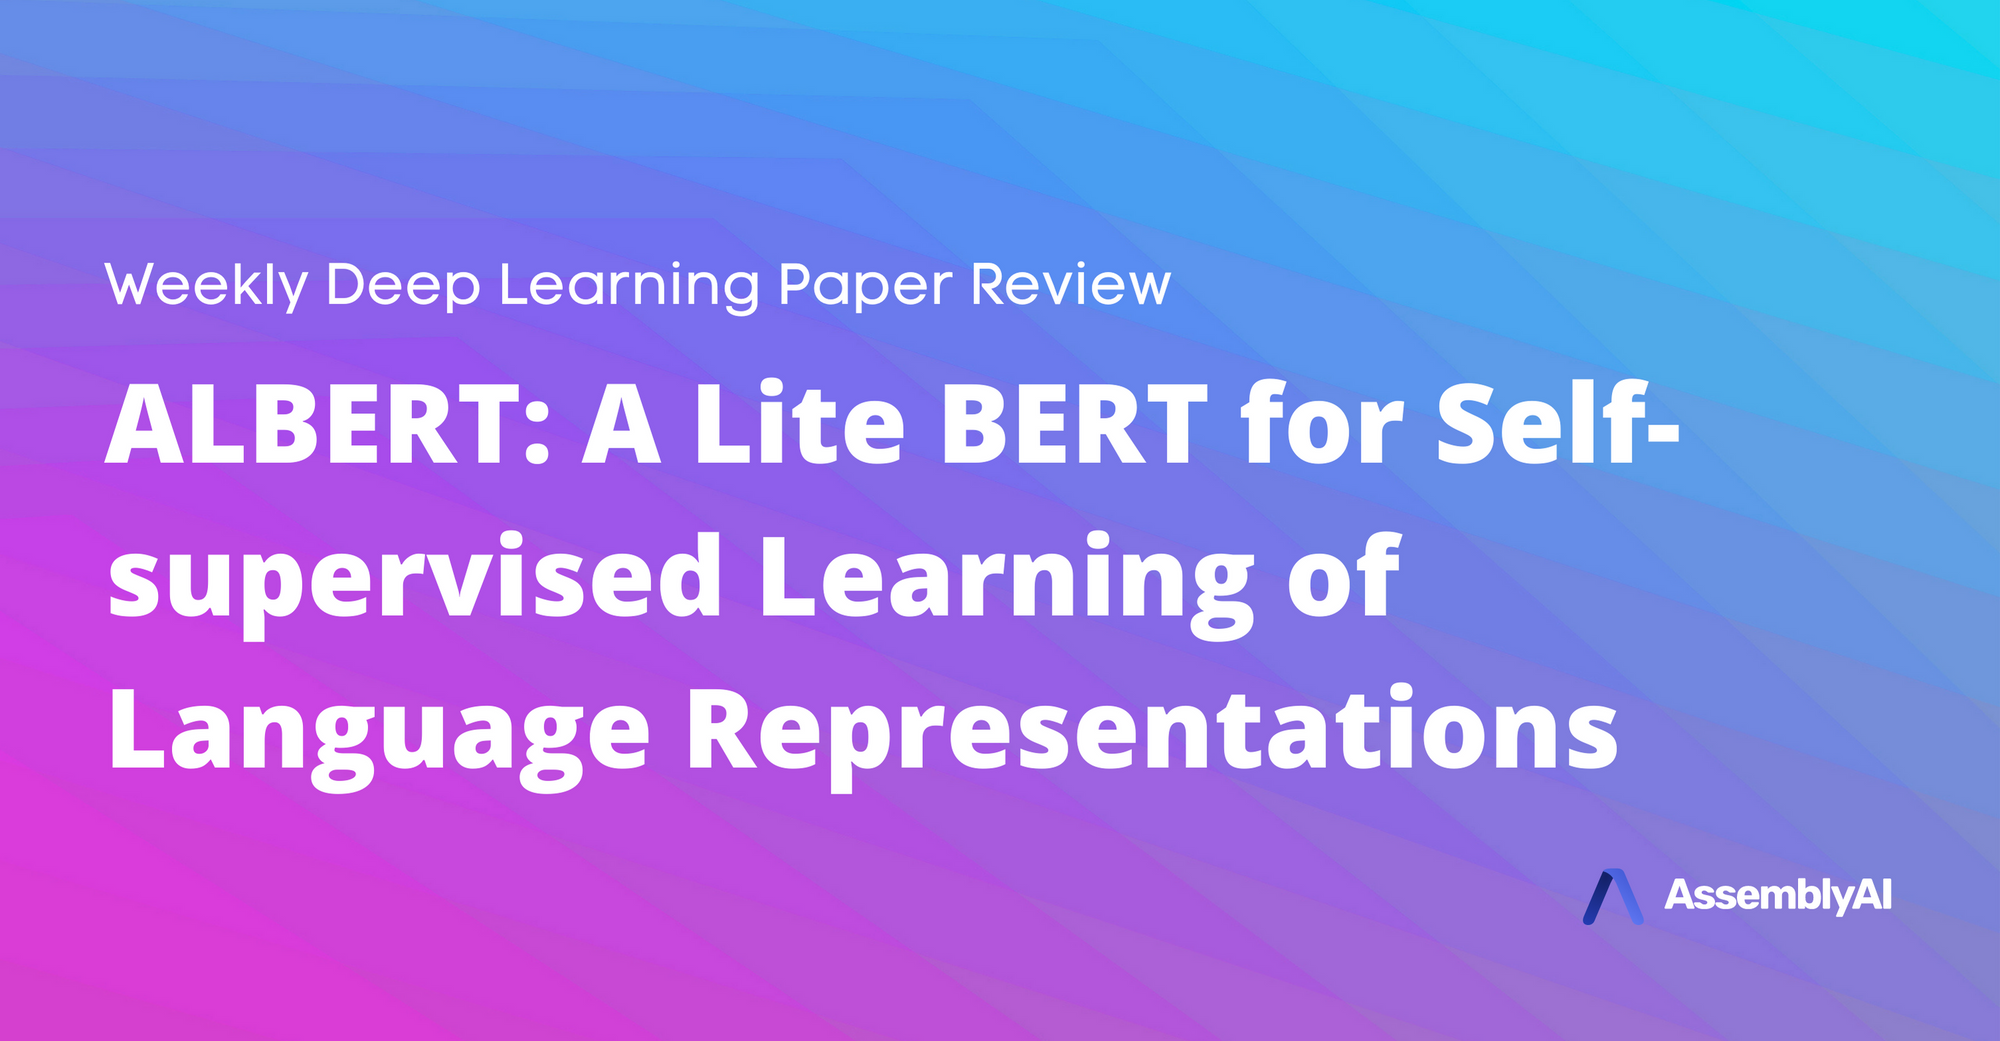 Review - ALBERT: A Lite BERT for Self-supervised Learning of Language Representations